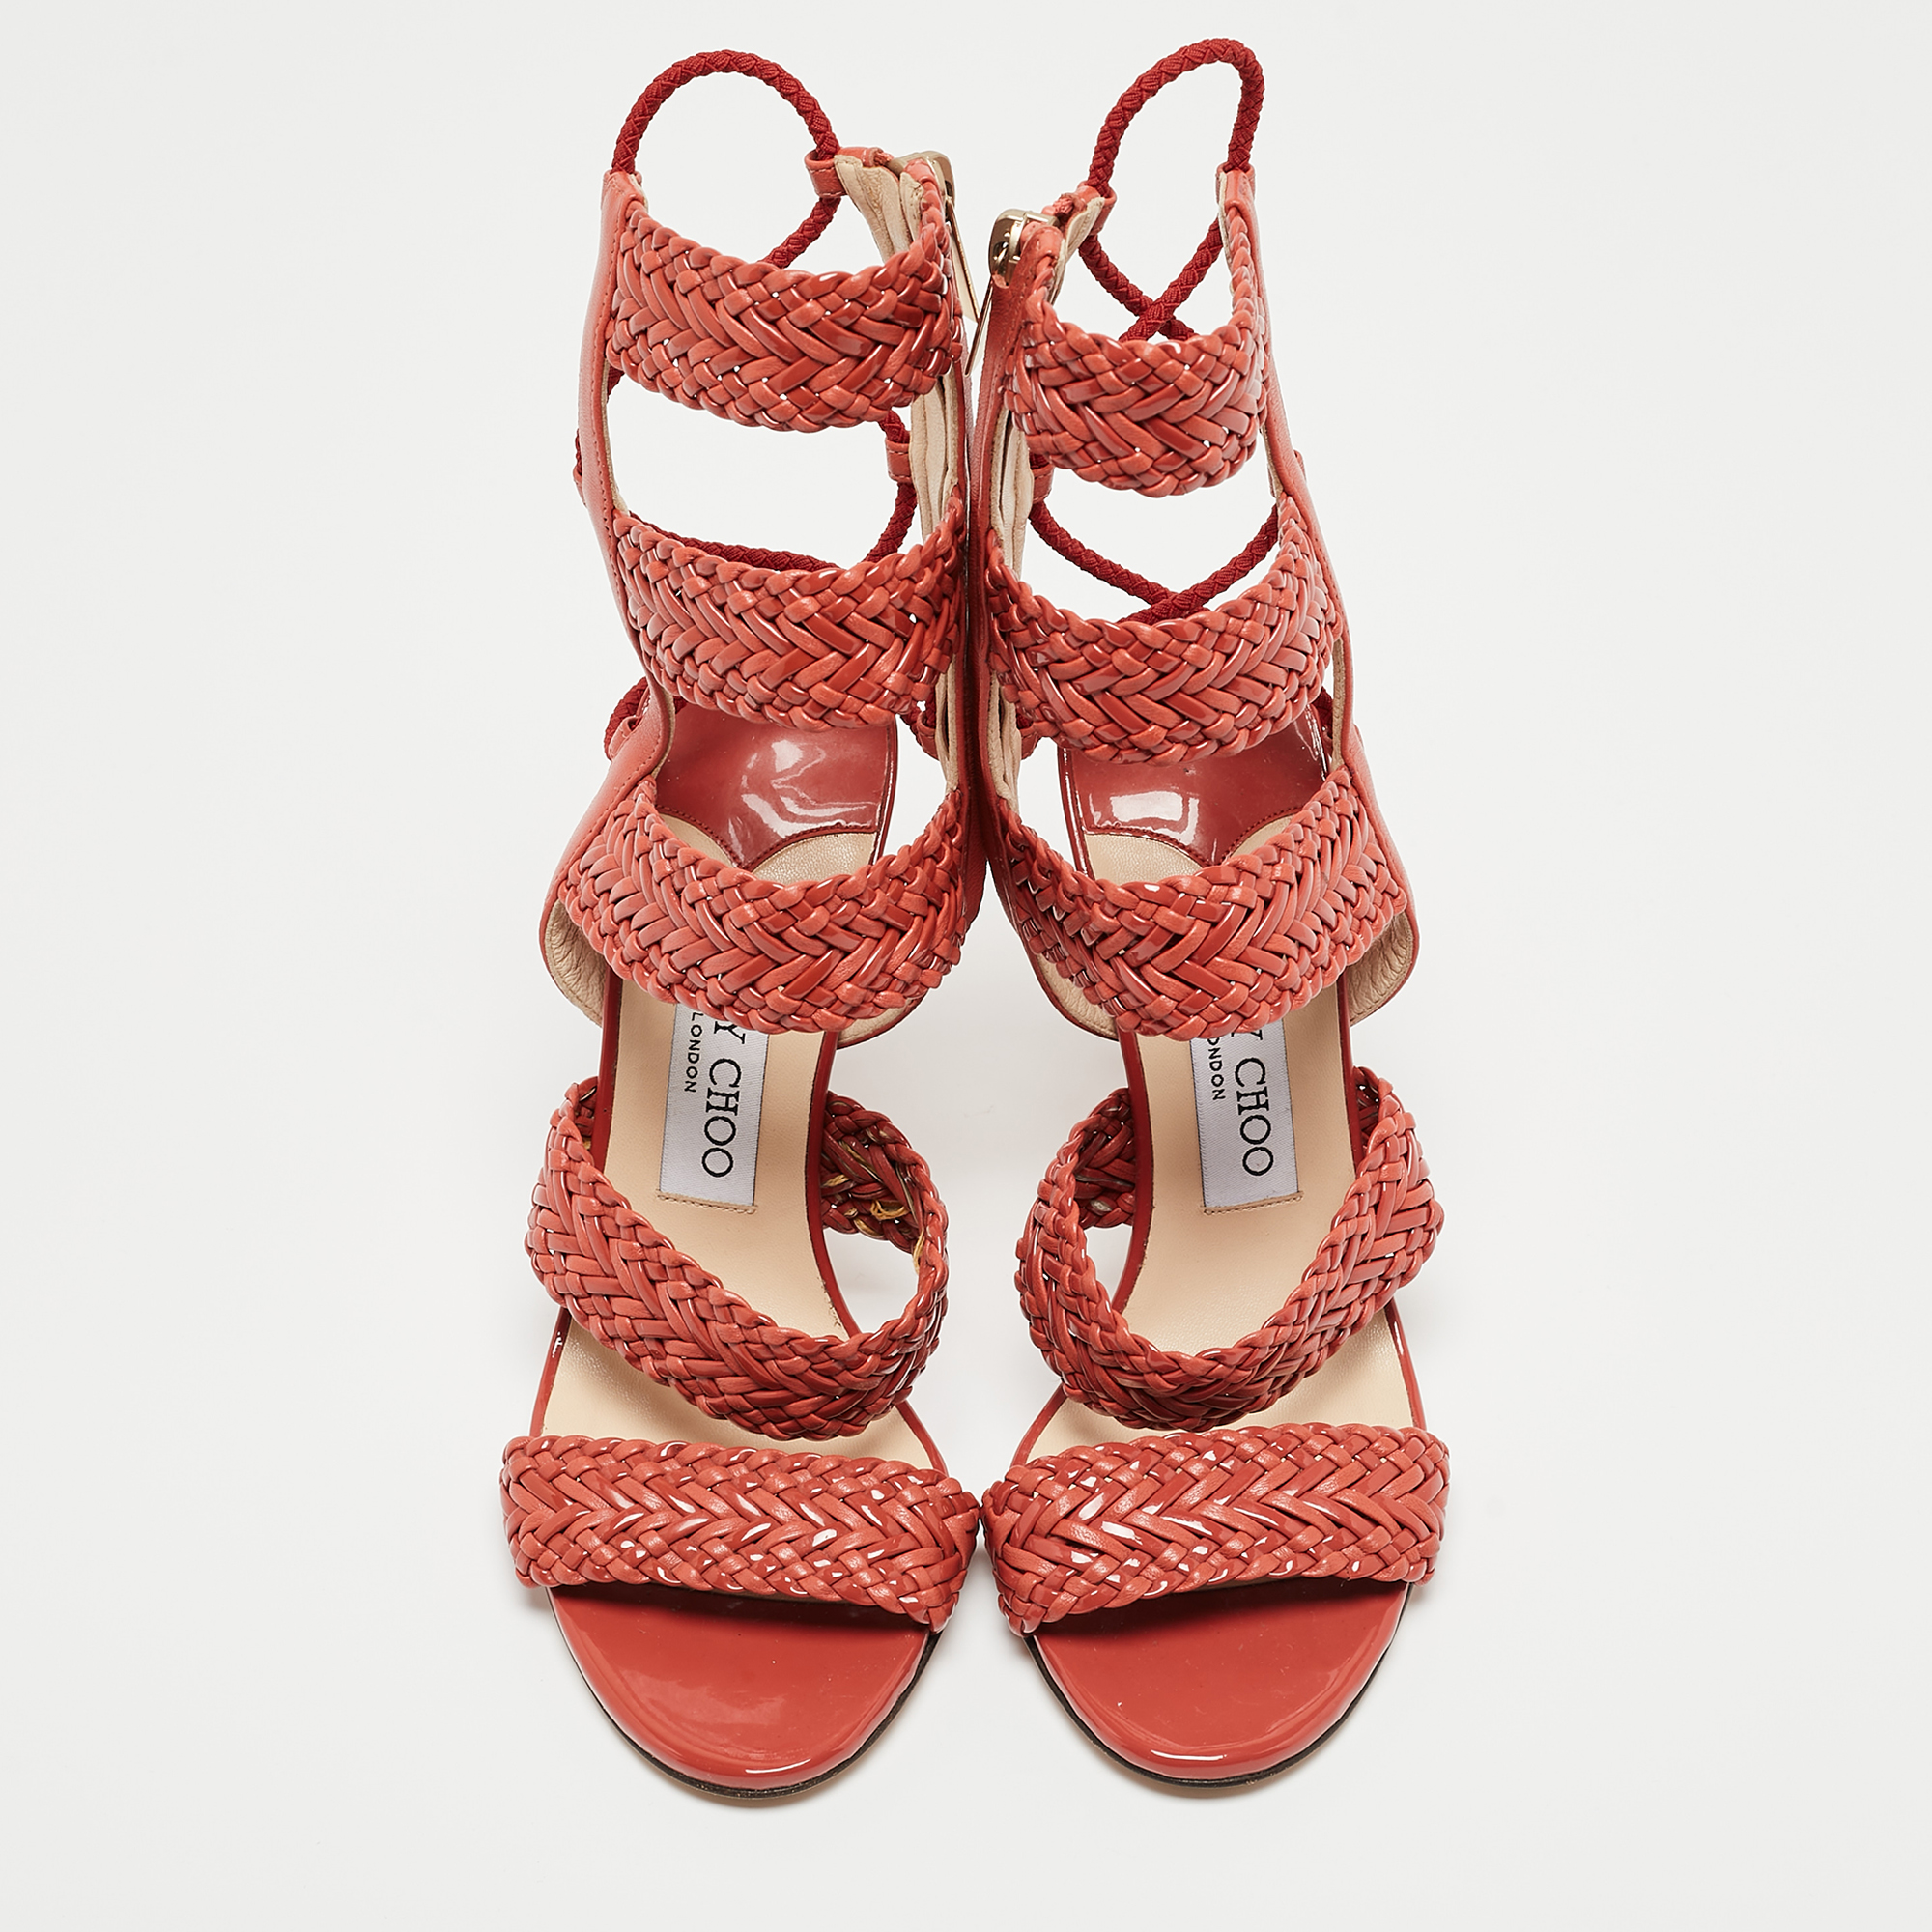 Jimmy Choo Orange Braided Leather And Suede Lima Gladiator Sandals Size 36